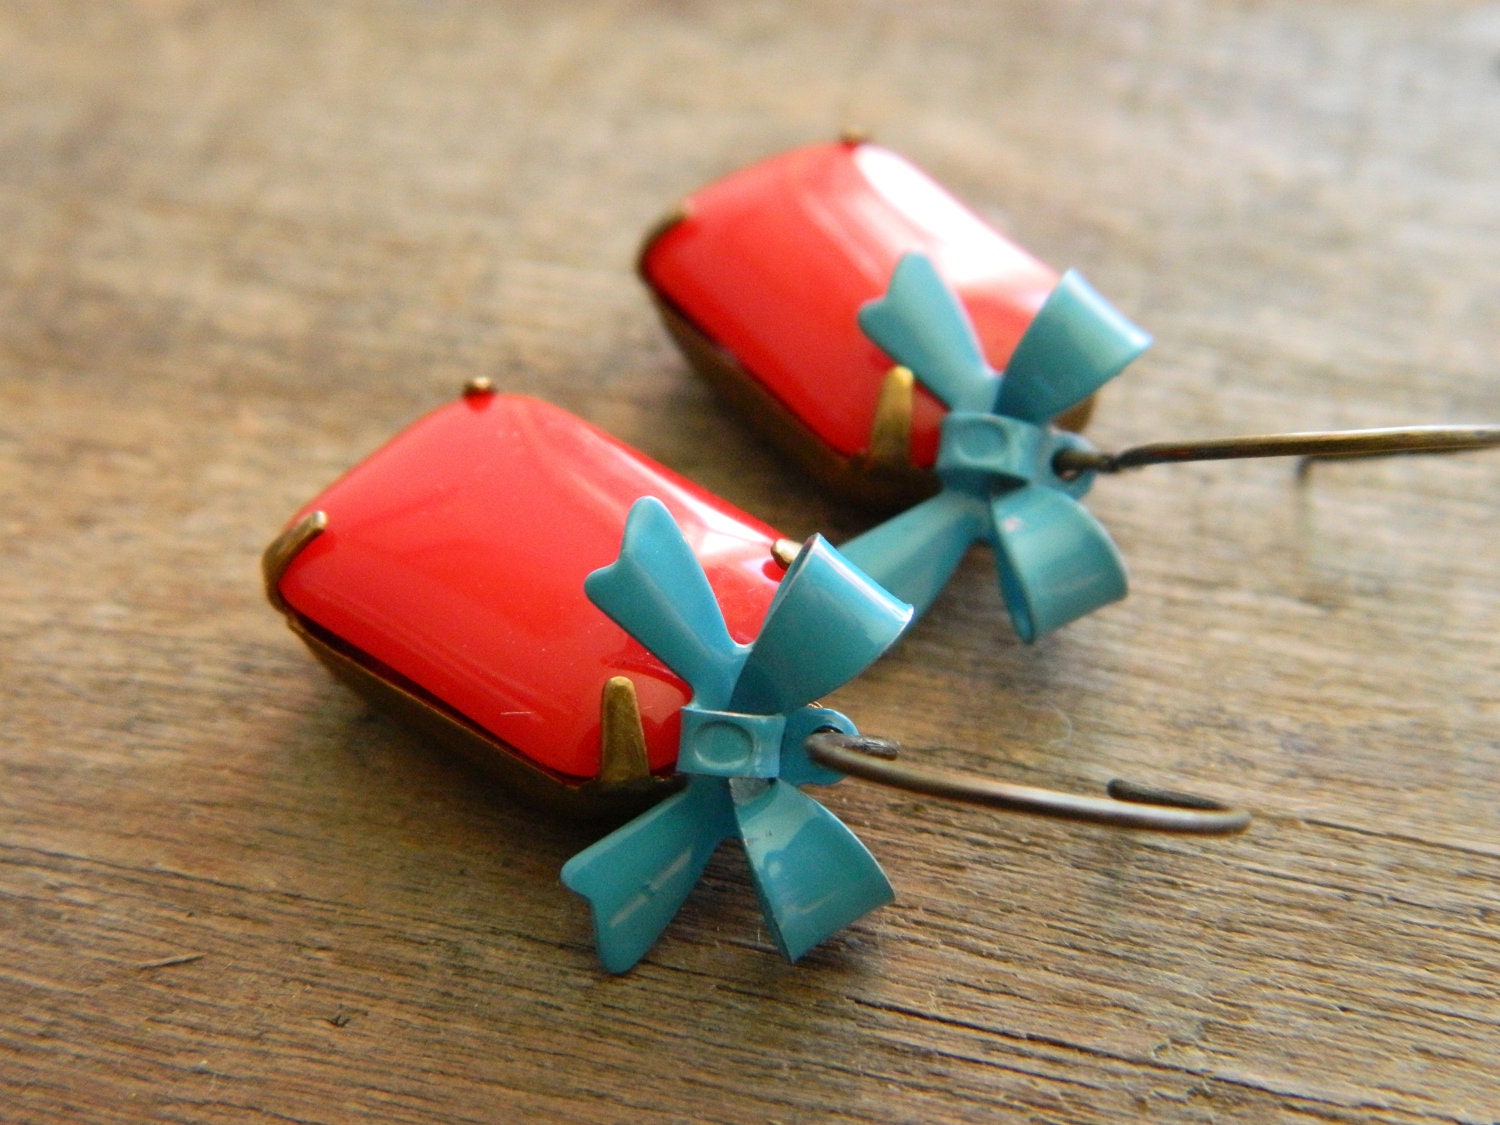 Vintage Chic Earrings Retro Red Opaque Glass and Blue Bows - Bow so Pretty